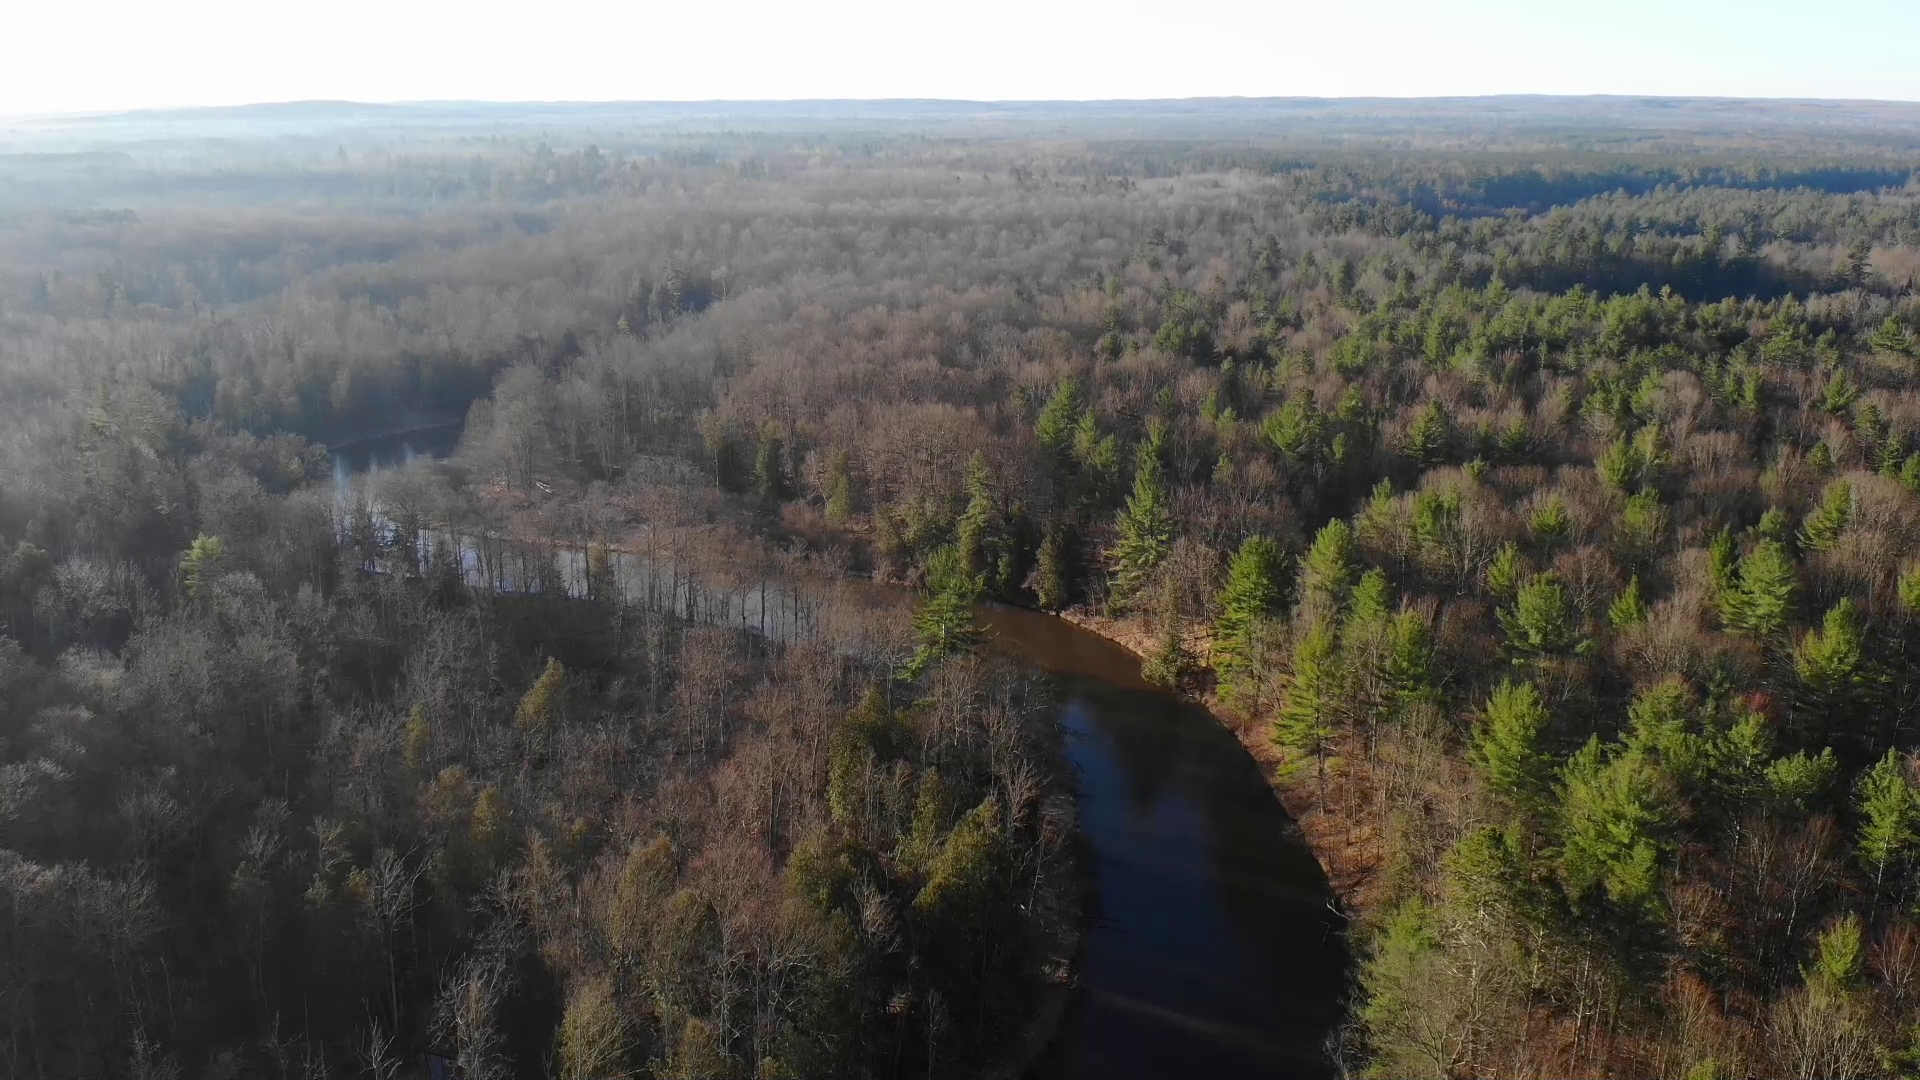 Drone Sights & Sounds: Manistee River